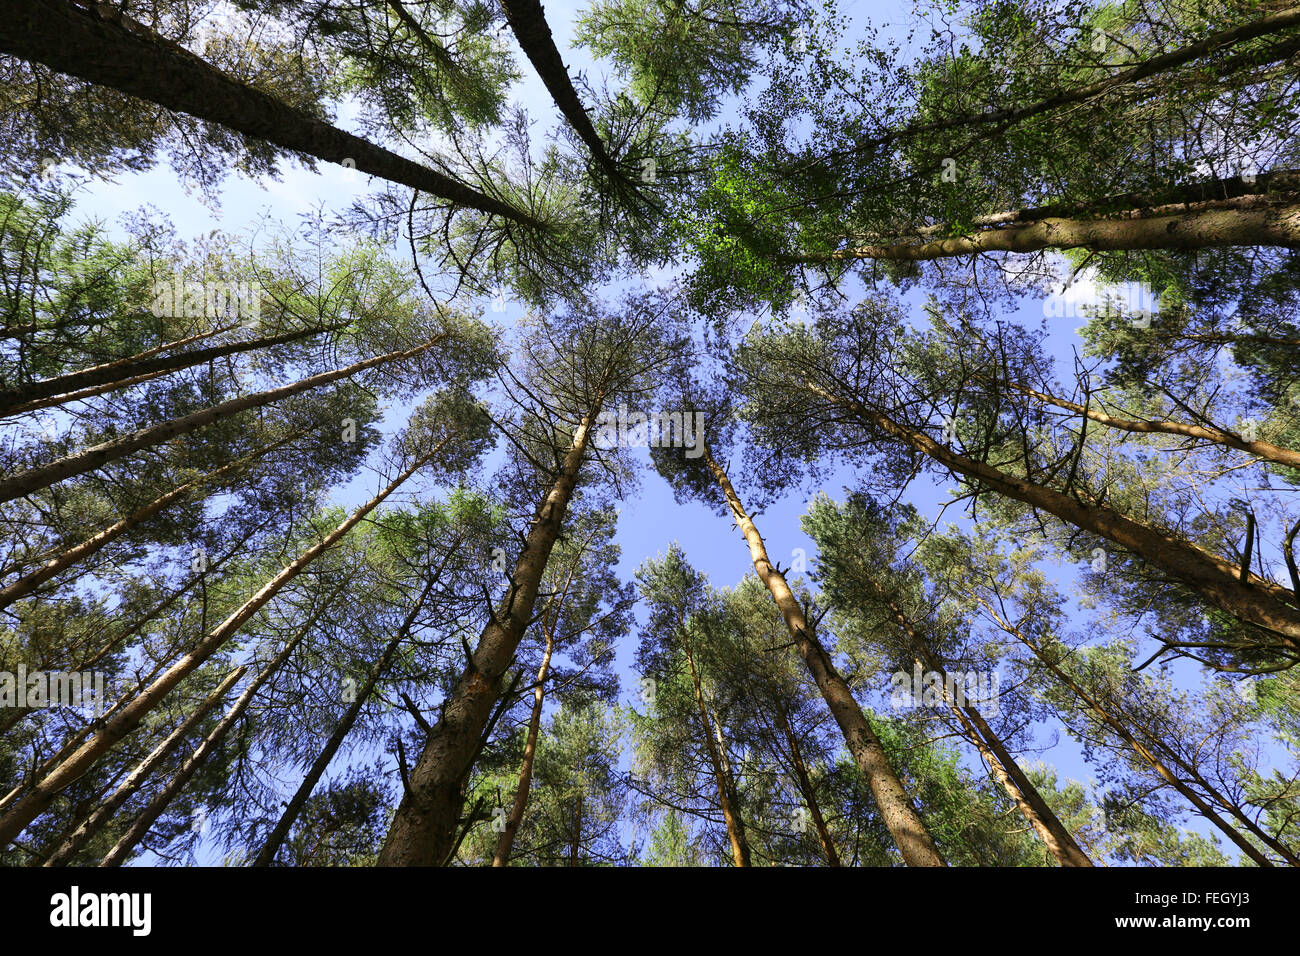 Looking up at tall pine trees in Scotland, uk. Stock Photo